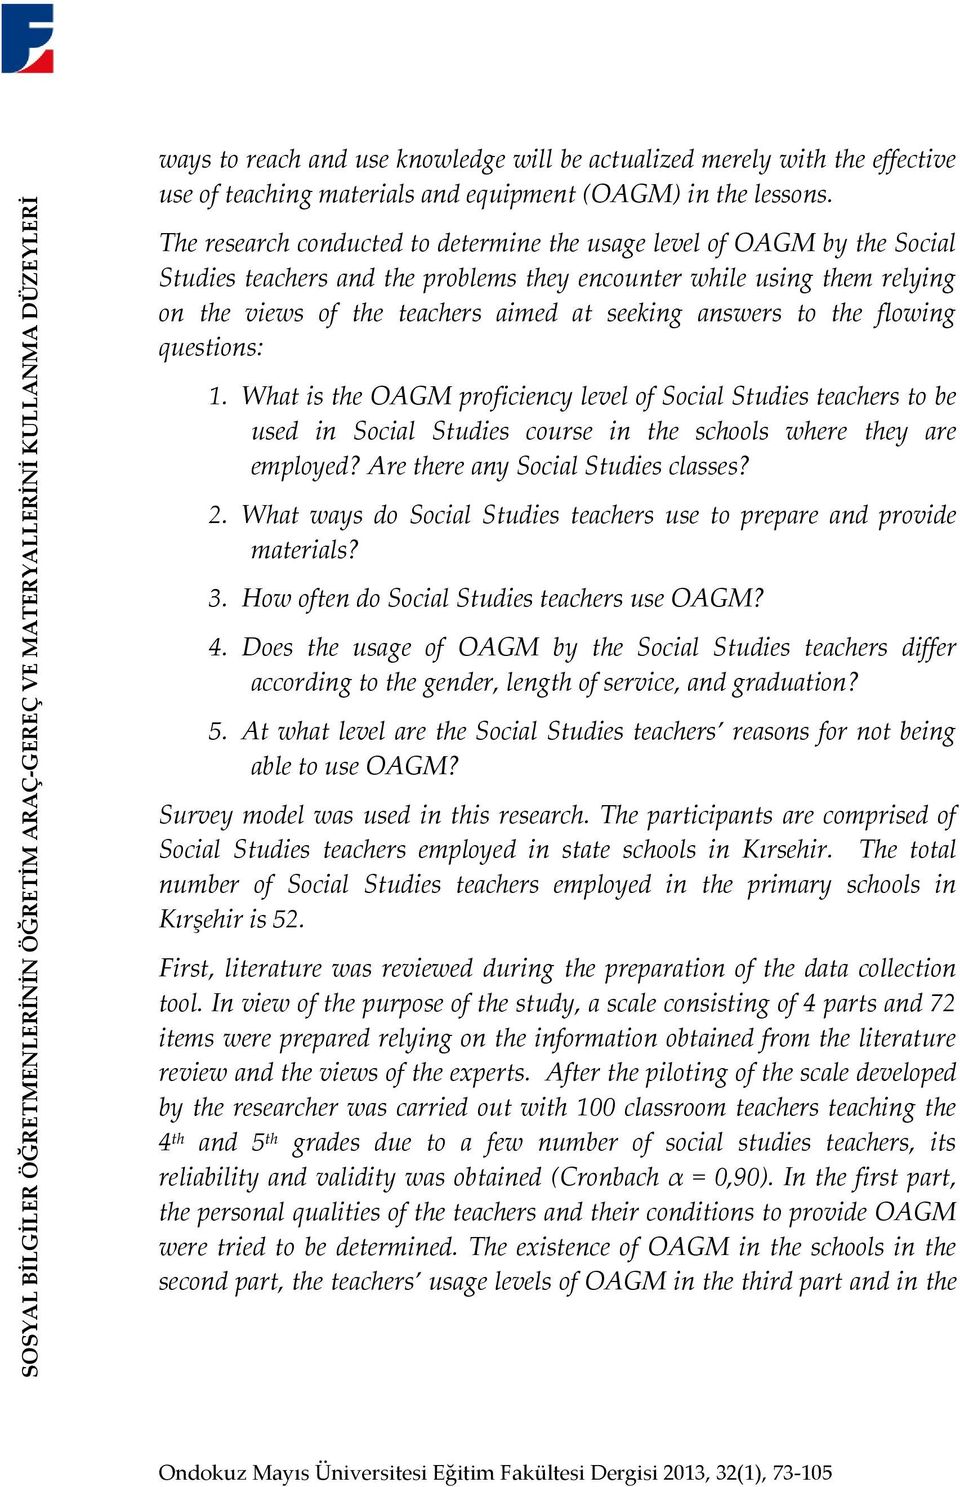 The research conducted to determine the usage level of OAGM by the Social Studies teachers and the problems they encounter while using them relying on the views of the teachers aimed at seeking